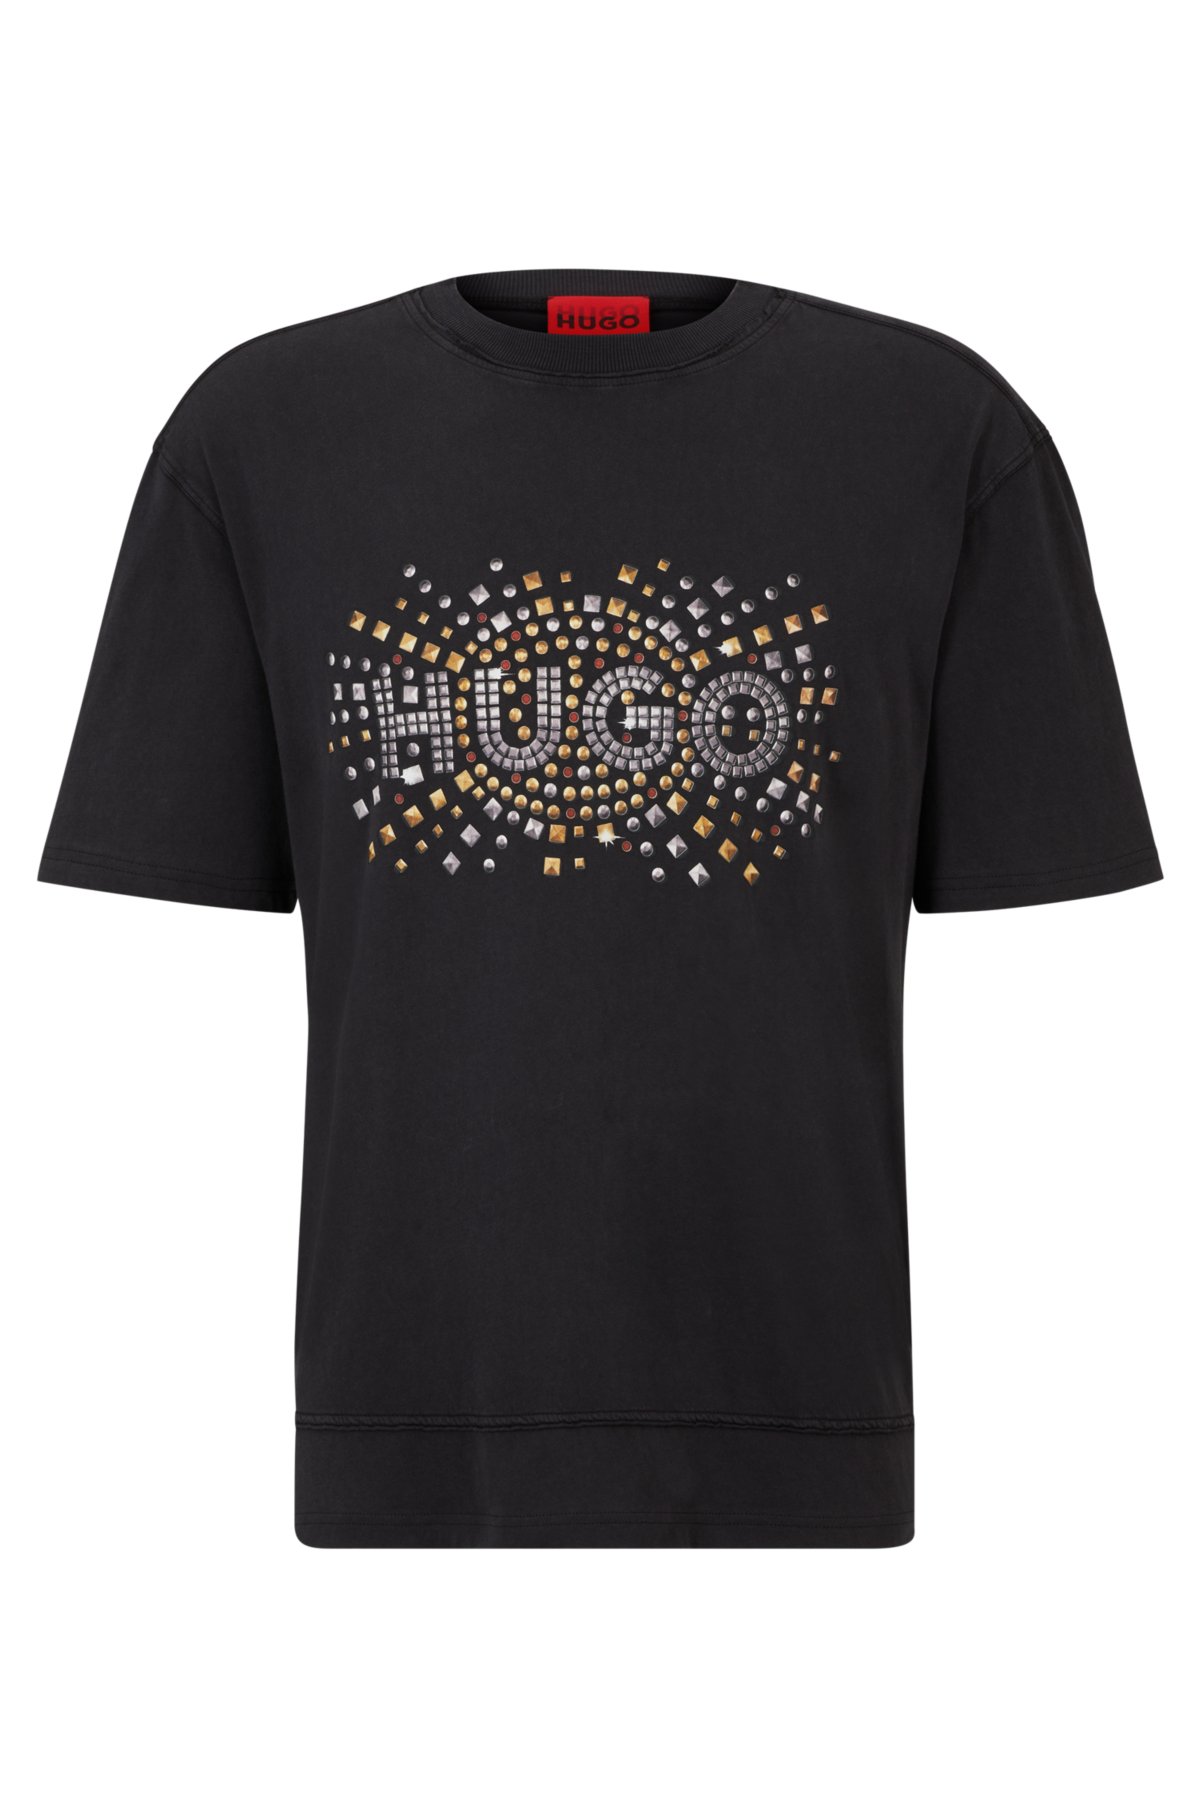 Cotton-jersey T-shirt with stud-effect artwork, Black